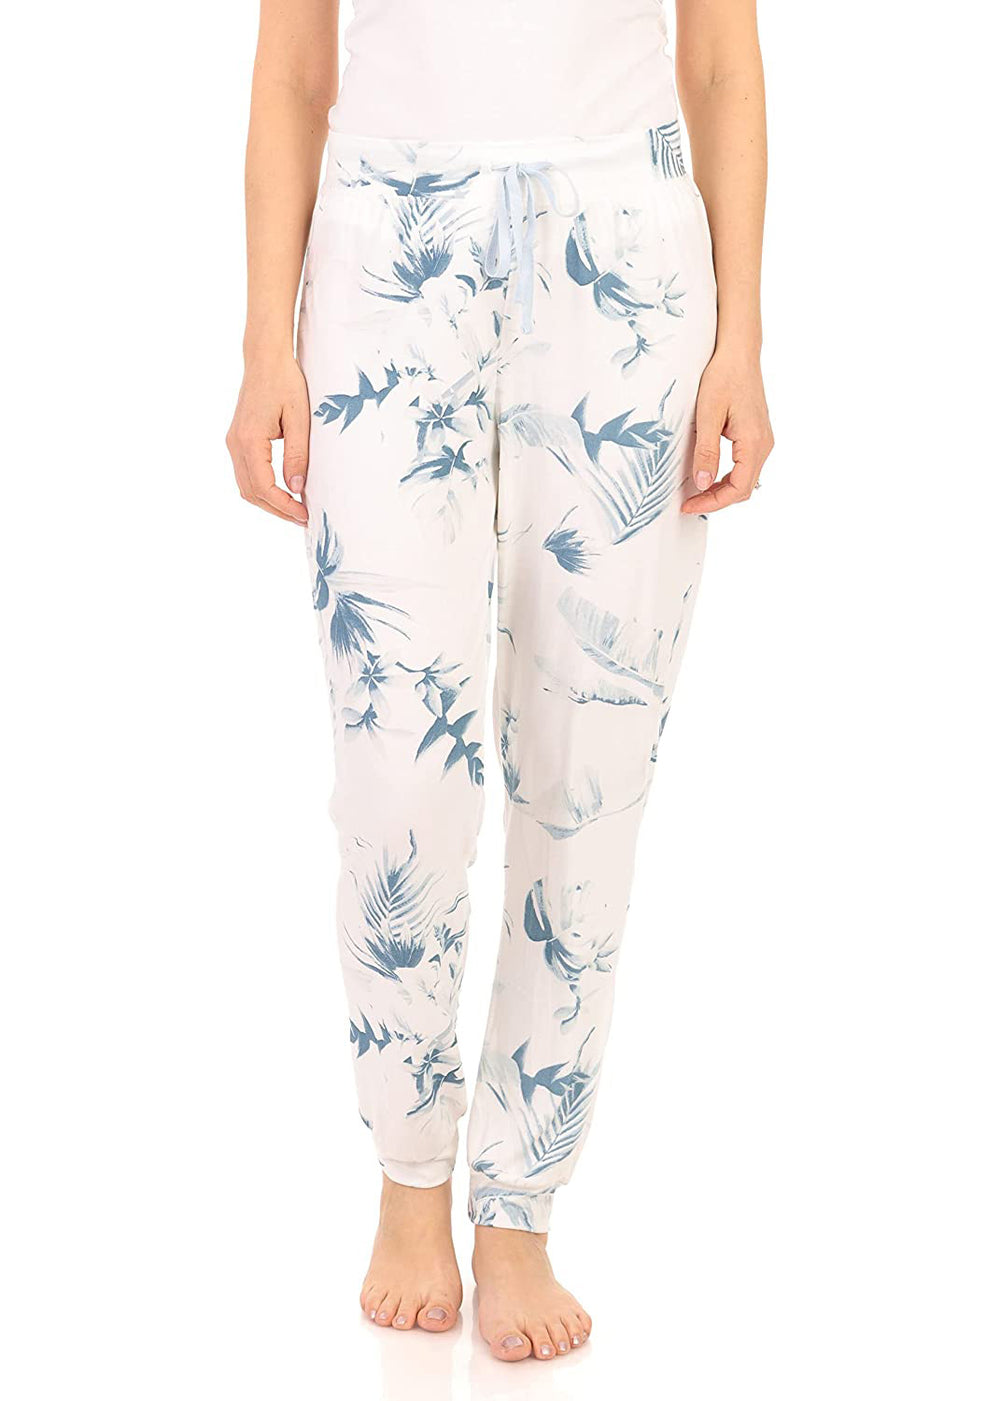 PJ joggers with soft velvety texture, stretch, elastic waistband, drawstring, and stylish ankle cuff. This pattern is very light blue, abstract patterns of leaves on off white fabric..